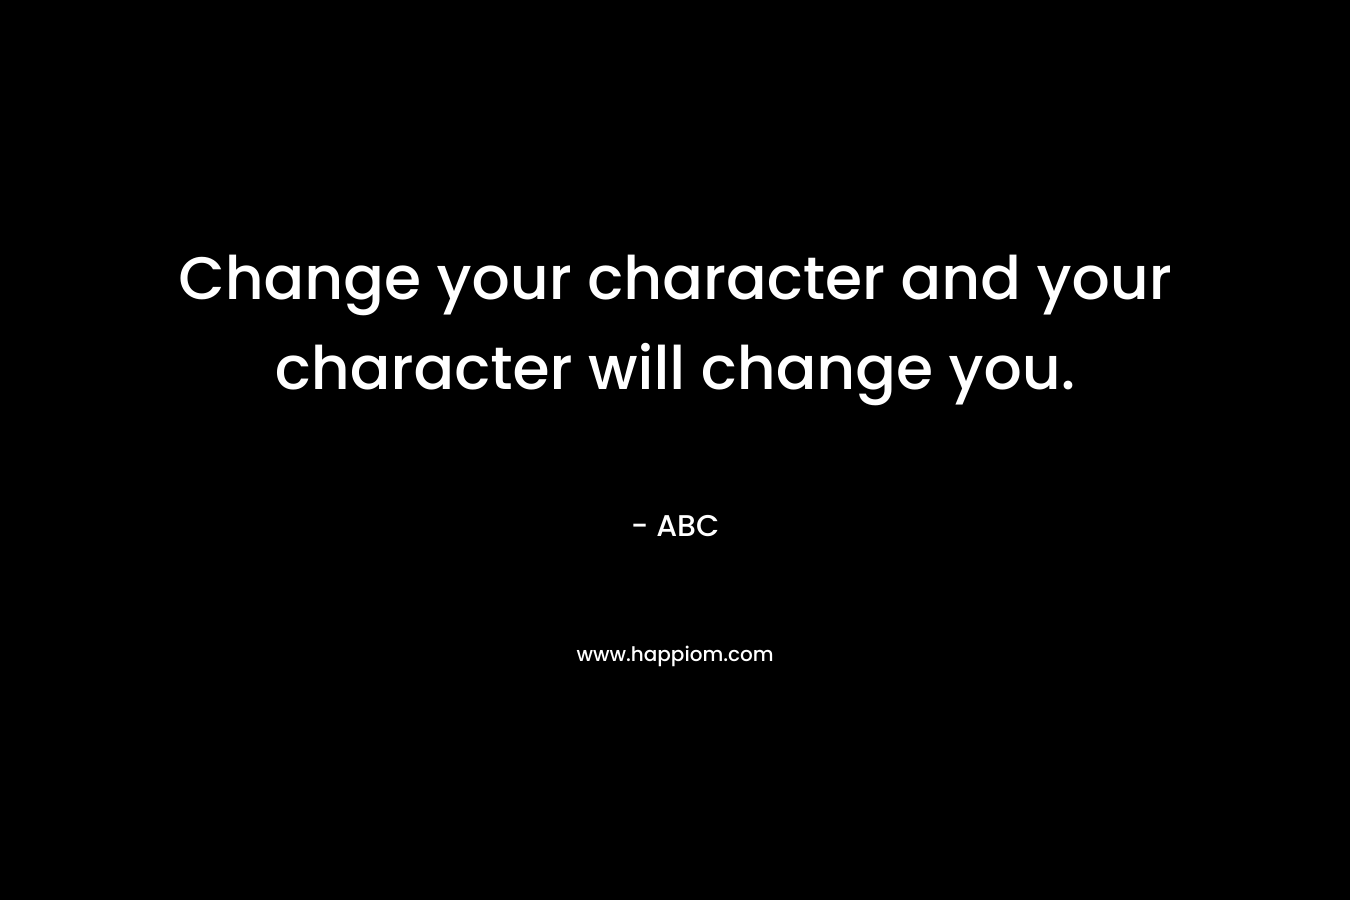 Change your character and your character will change you.